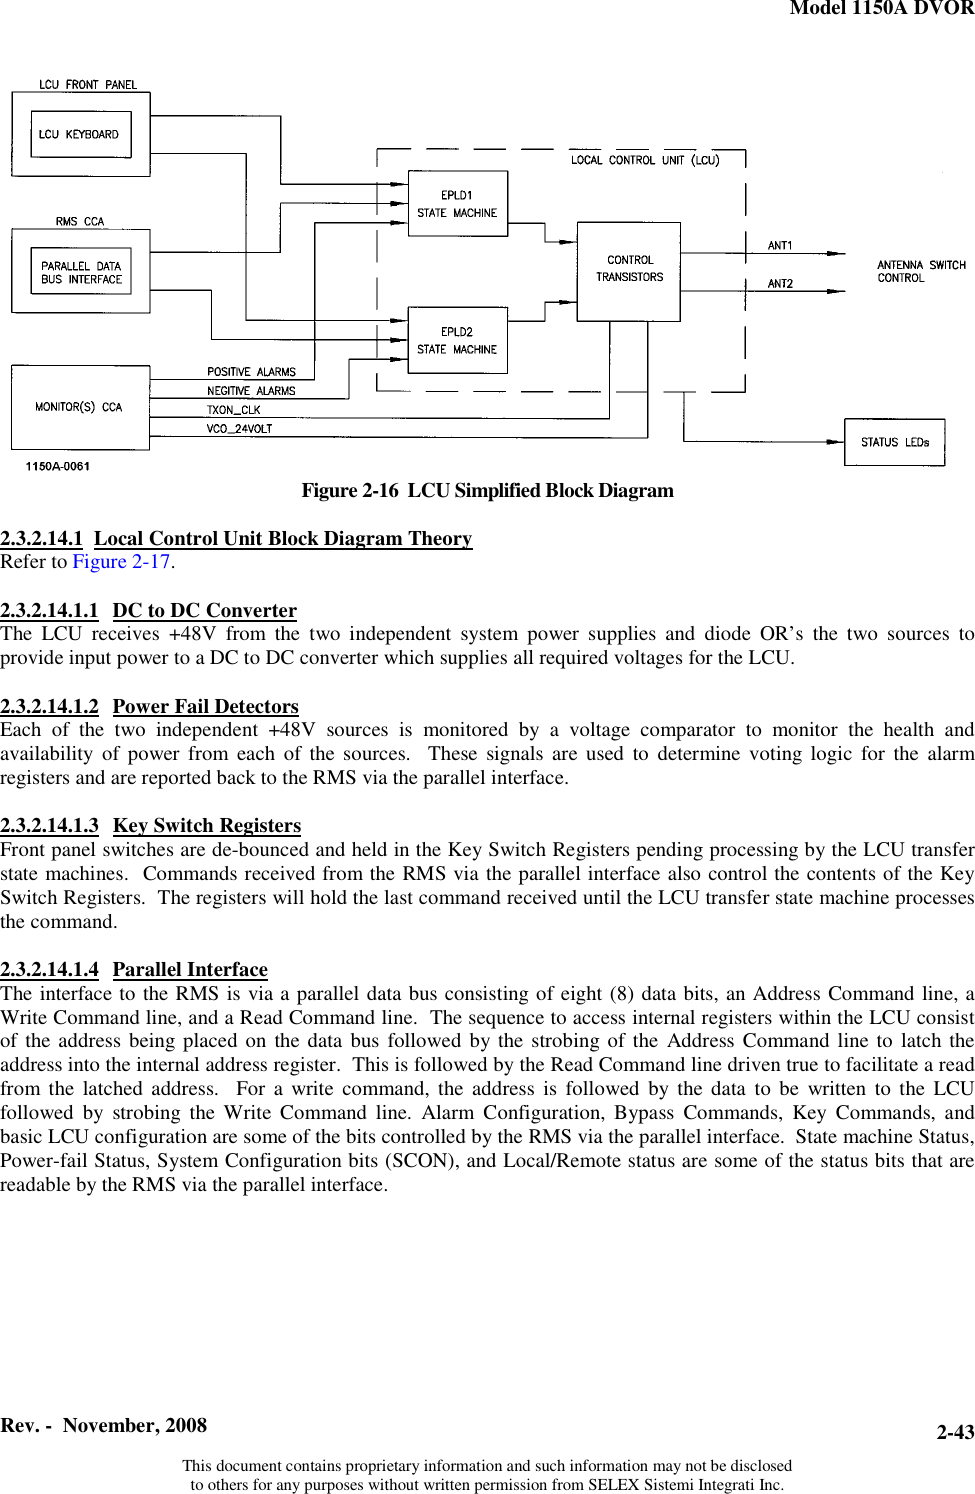 Model 1150A DVOR  Rev. -  November, 2008   This document contains proprietary information and such information may not be disclosed to others for any purposes without written permission from SELEX Sistemi Integrati Inc. 2-43Figure 2-16  LCU Simplified Block Diagram  2.3.2.14.1 Local Control Unit Block Diagram TheoryRefer to Figure 2-17.2.3.2.14.1.1 DC to DC ConverterThe LCU receives +48V from the two independent system power supplies and diode OR’s the two sources to provide input power to a DC to DC converter which supplies all required voltages for the LCU.  2.3.2.14.1.2 Power Fail DetectorsEach of the two independent +48V sources is monitored by a voltage comparator to monitor the health and availability of power from each of the sources.  These signals are used to determine voting logic for the alarm registers and are reported back to the RMS via the parallel interface.  2.3.2.14.1.3 Key Switch RegistersFront panel switches are de-bounced and held in the Key Switch Registers pending processing by the LCU transfer state machines.  Commands received from the RMS via the parallel interface also control the contents of the Key Switch Registers.  The registers will hold the last command received until the LCU transfer state machine processes the command.  2.3.2.14.1.4 Parallel InterfaceThe interface to the RMS is via a parallel data bus consisting of eight (8) data bits, an Address Command line, a Write Command line, and a Read Command line.  The sequence to access internal registers within the LCU consist of the address being placed on the data bus followed by the strobing of the Address Command line to latch the address into the internal address register.  This is followed by the Read Command line driven true to facilitate a read from the latched address.  For a write command, the address is followed by the data to be written to the LCU followed by strobing the Write Command line. Alarm Configuration, Bypass Commands, Key Commands, and basic LCU configuration are some of the bits controlled by the RMS via the parallel interface.  State machine Status, Power-fail Status, System Configuration bits (SCON), and Local/Remote status are some of the status bits that are readable by the RMS via the parallel interface.  